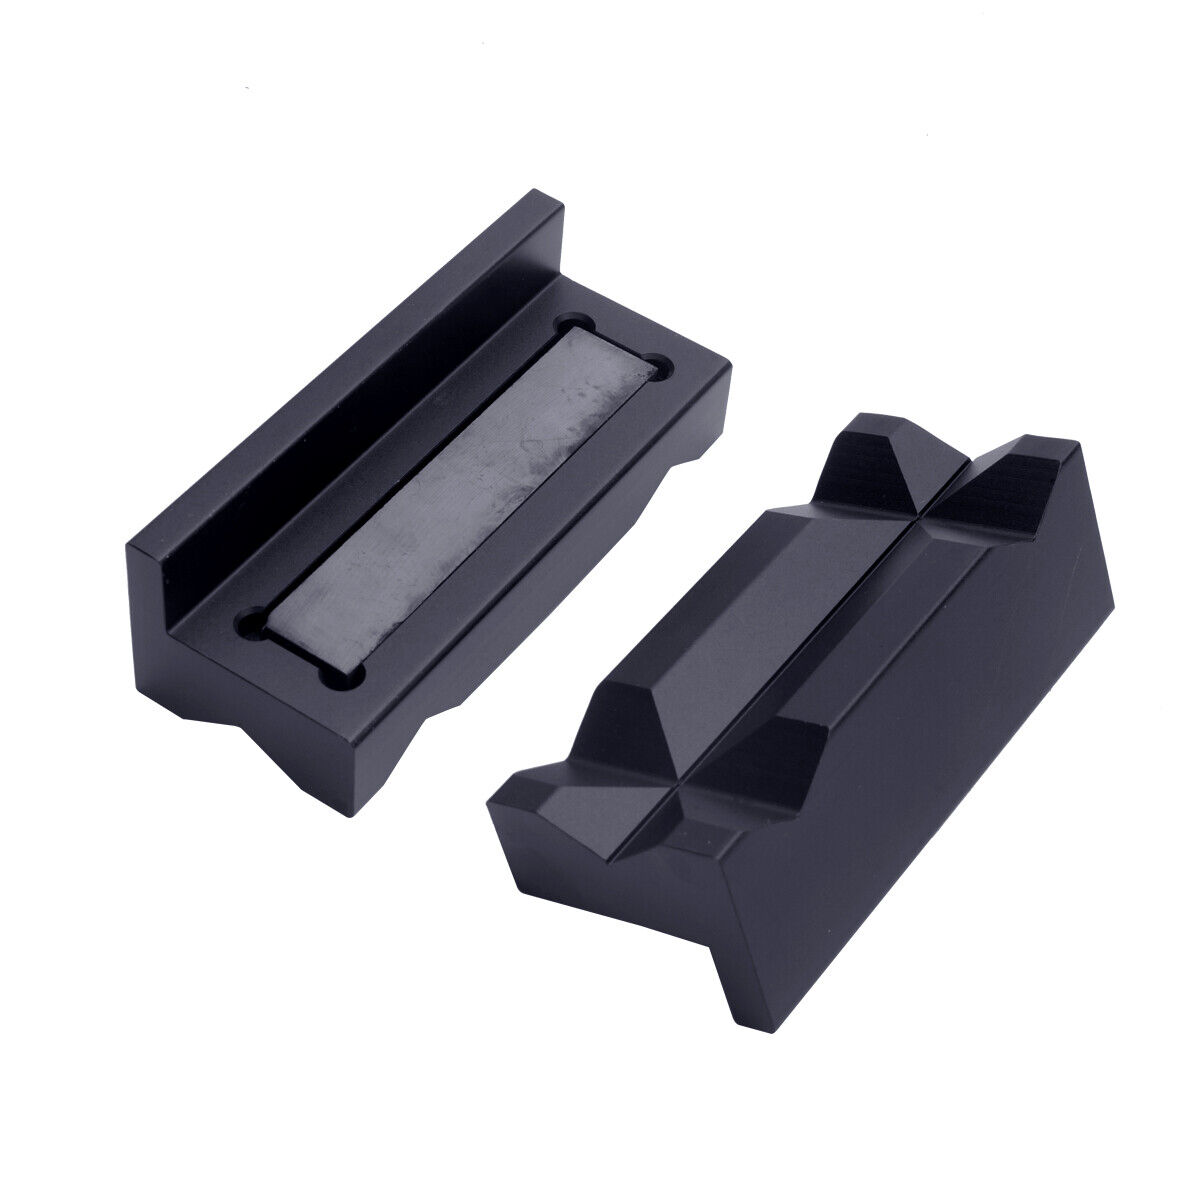 AN Fitting Magnetic Vise Jaw Protective Inserts Clamp Parts Aluminum Alloy Black